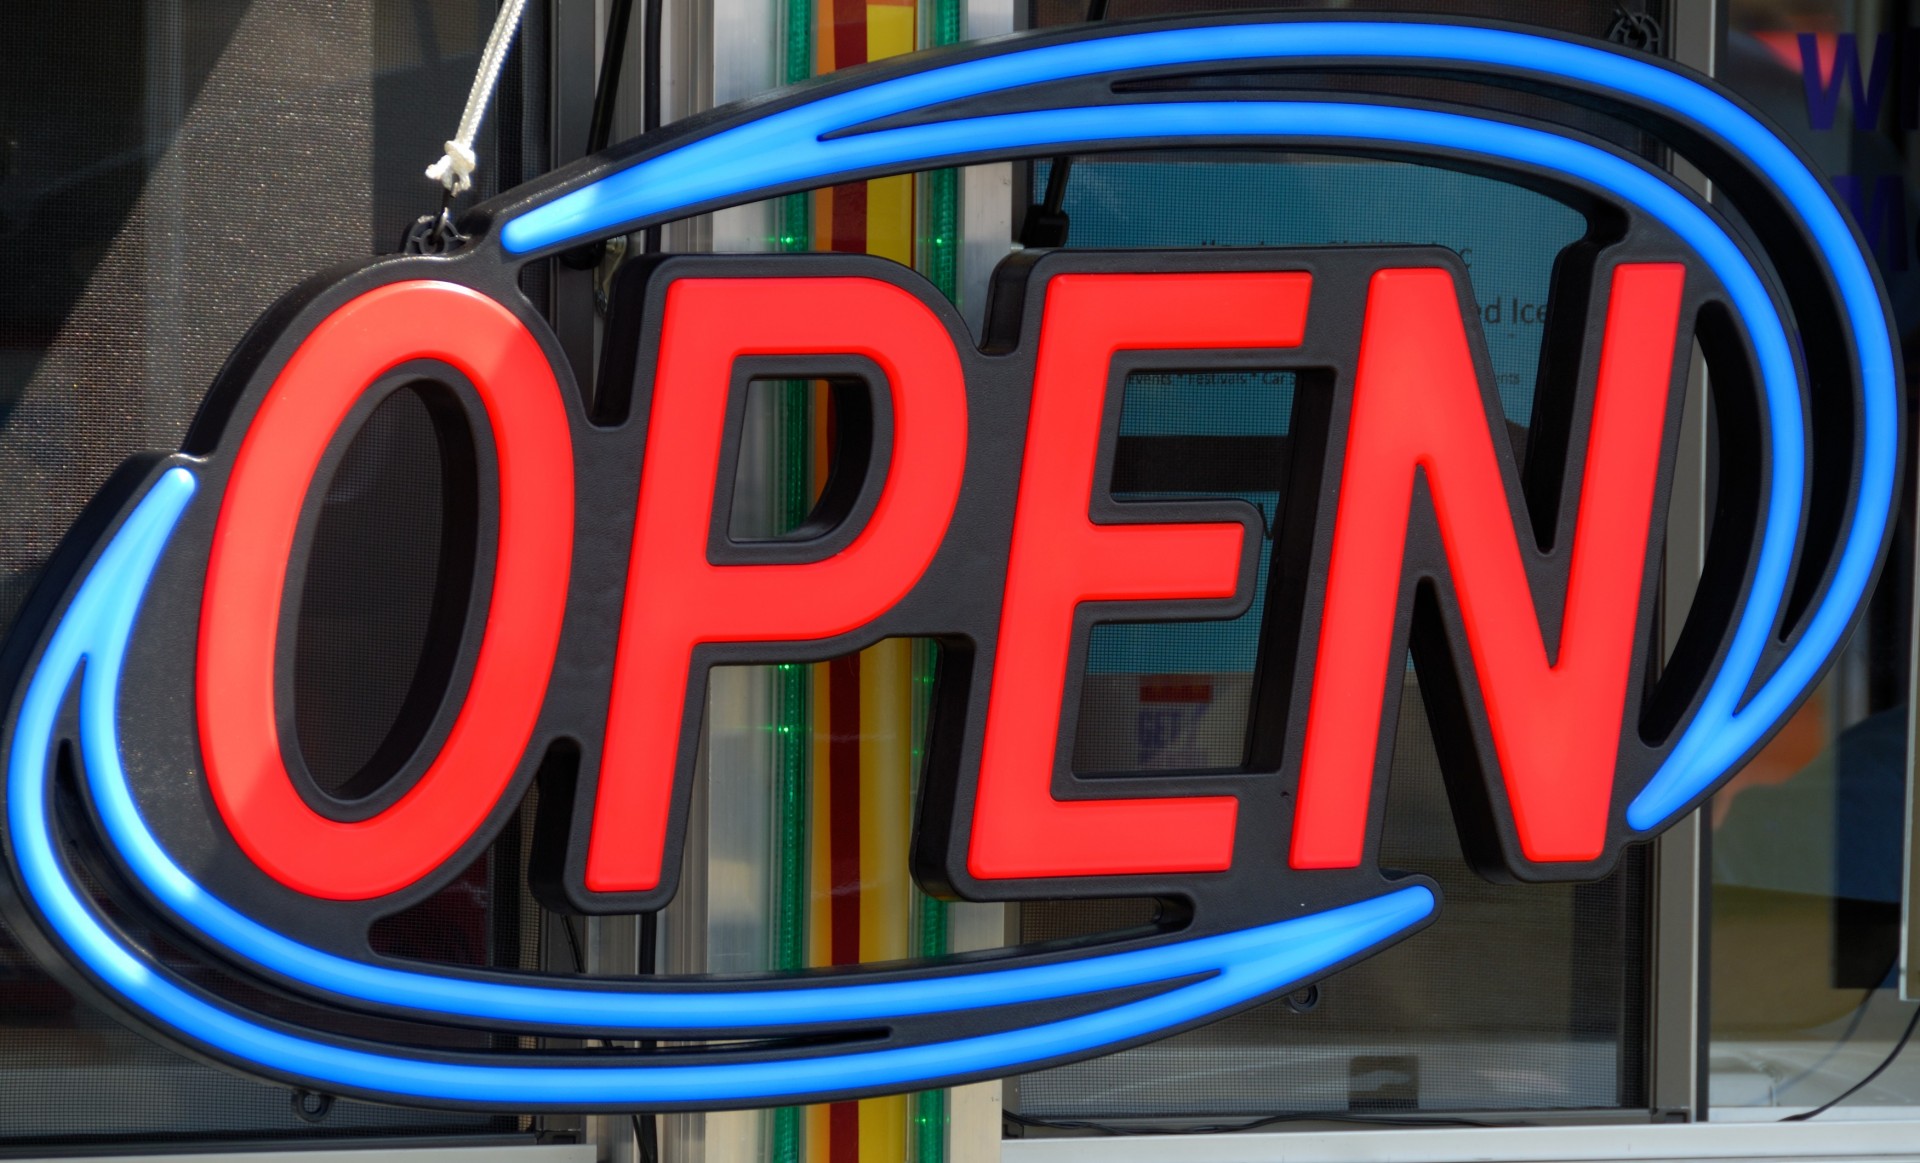 Neon open sign at store front